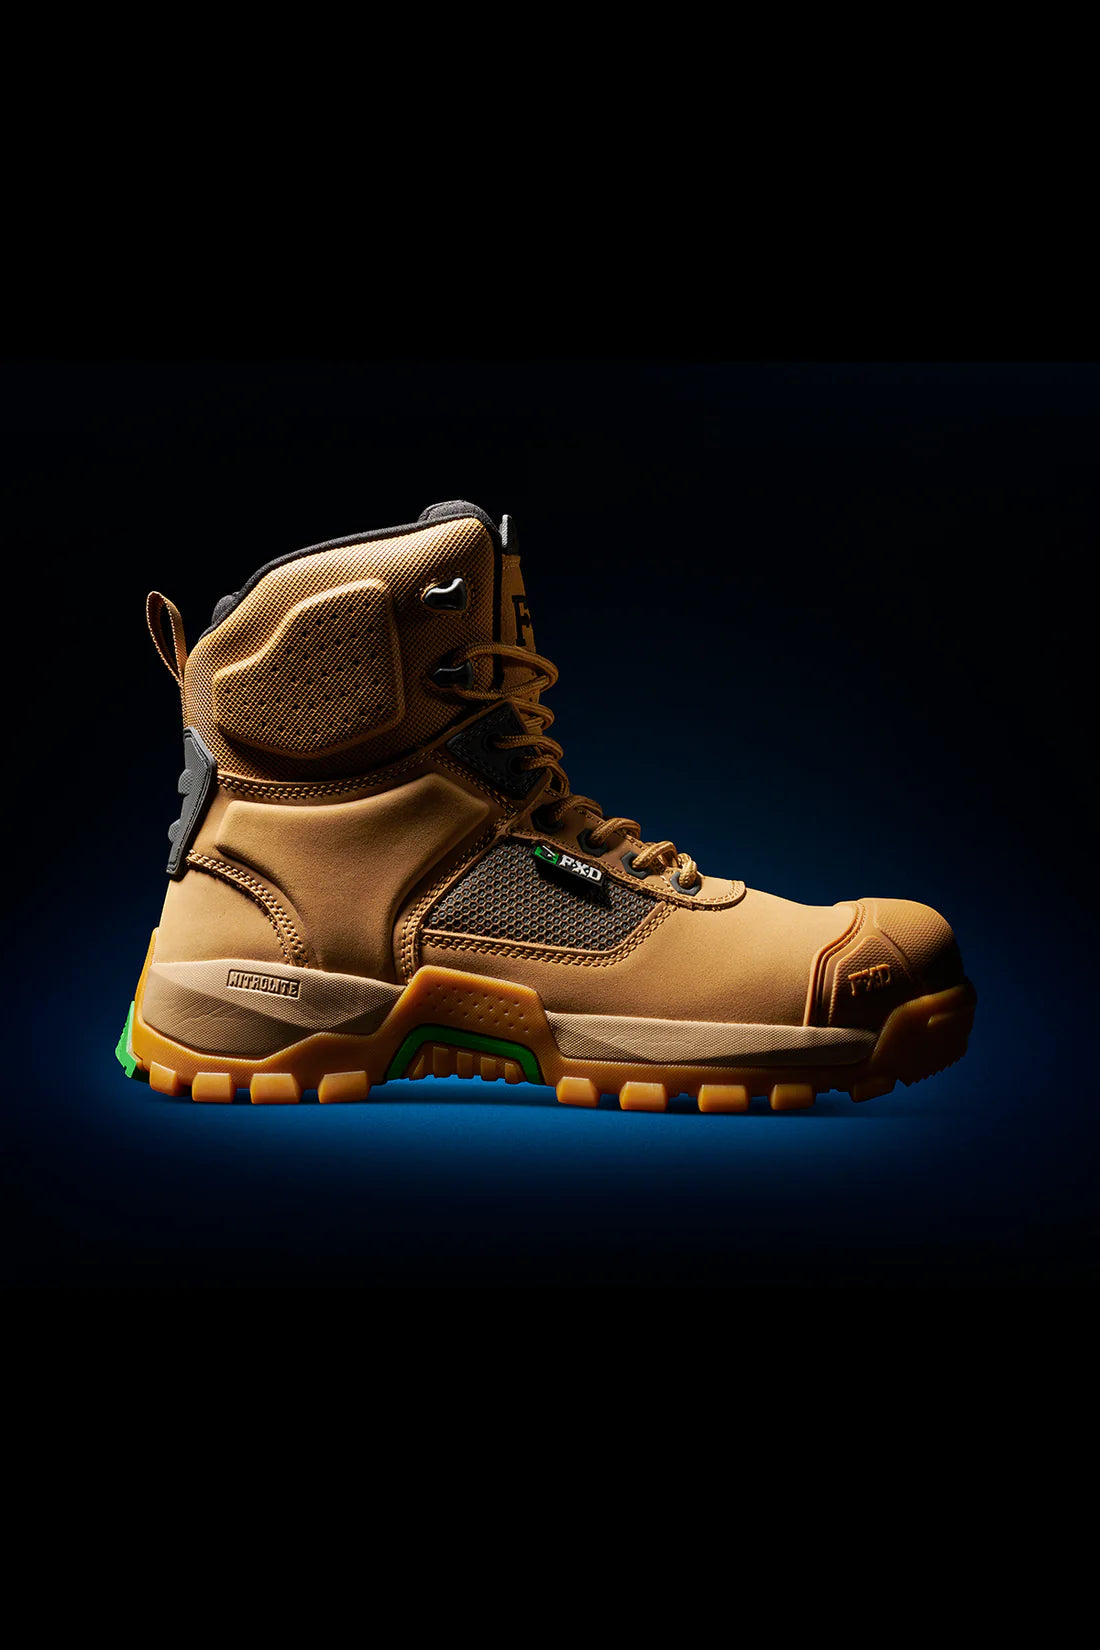 FXD WB-1™ Work Boot